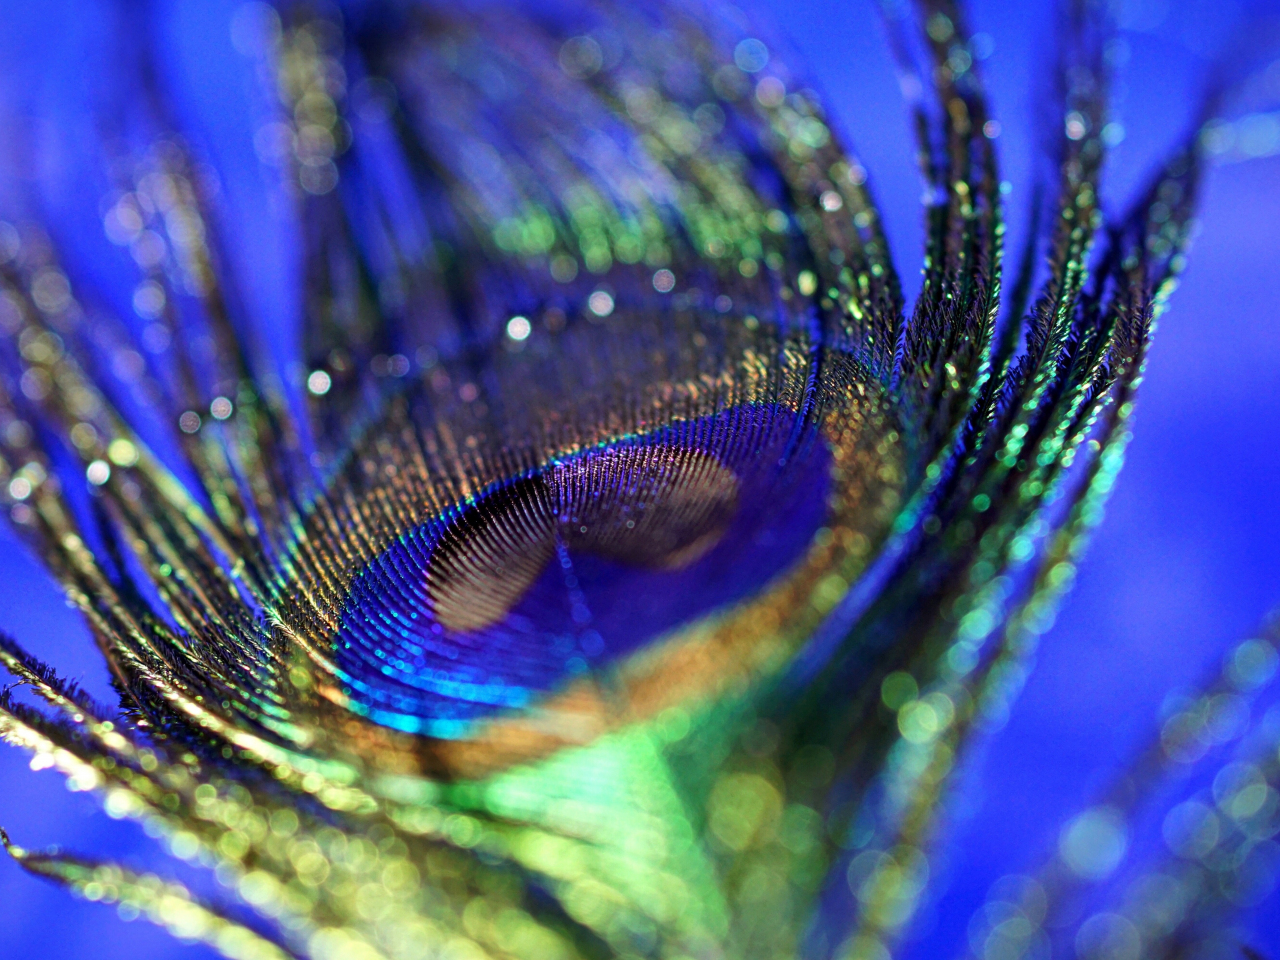 Download wallpaper 1280x960 peacock, plumage, feather, colorful, close up,  bokeh, standard 4:3 fullscreen 1280x960 hd background, 1837